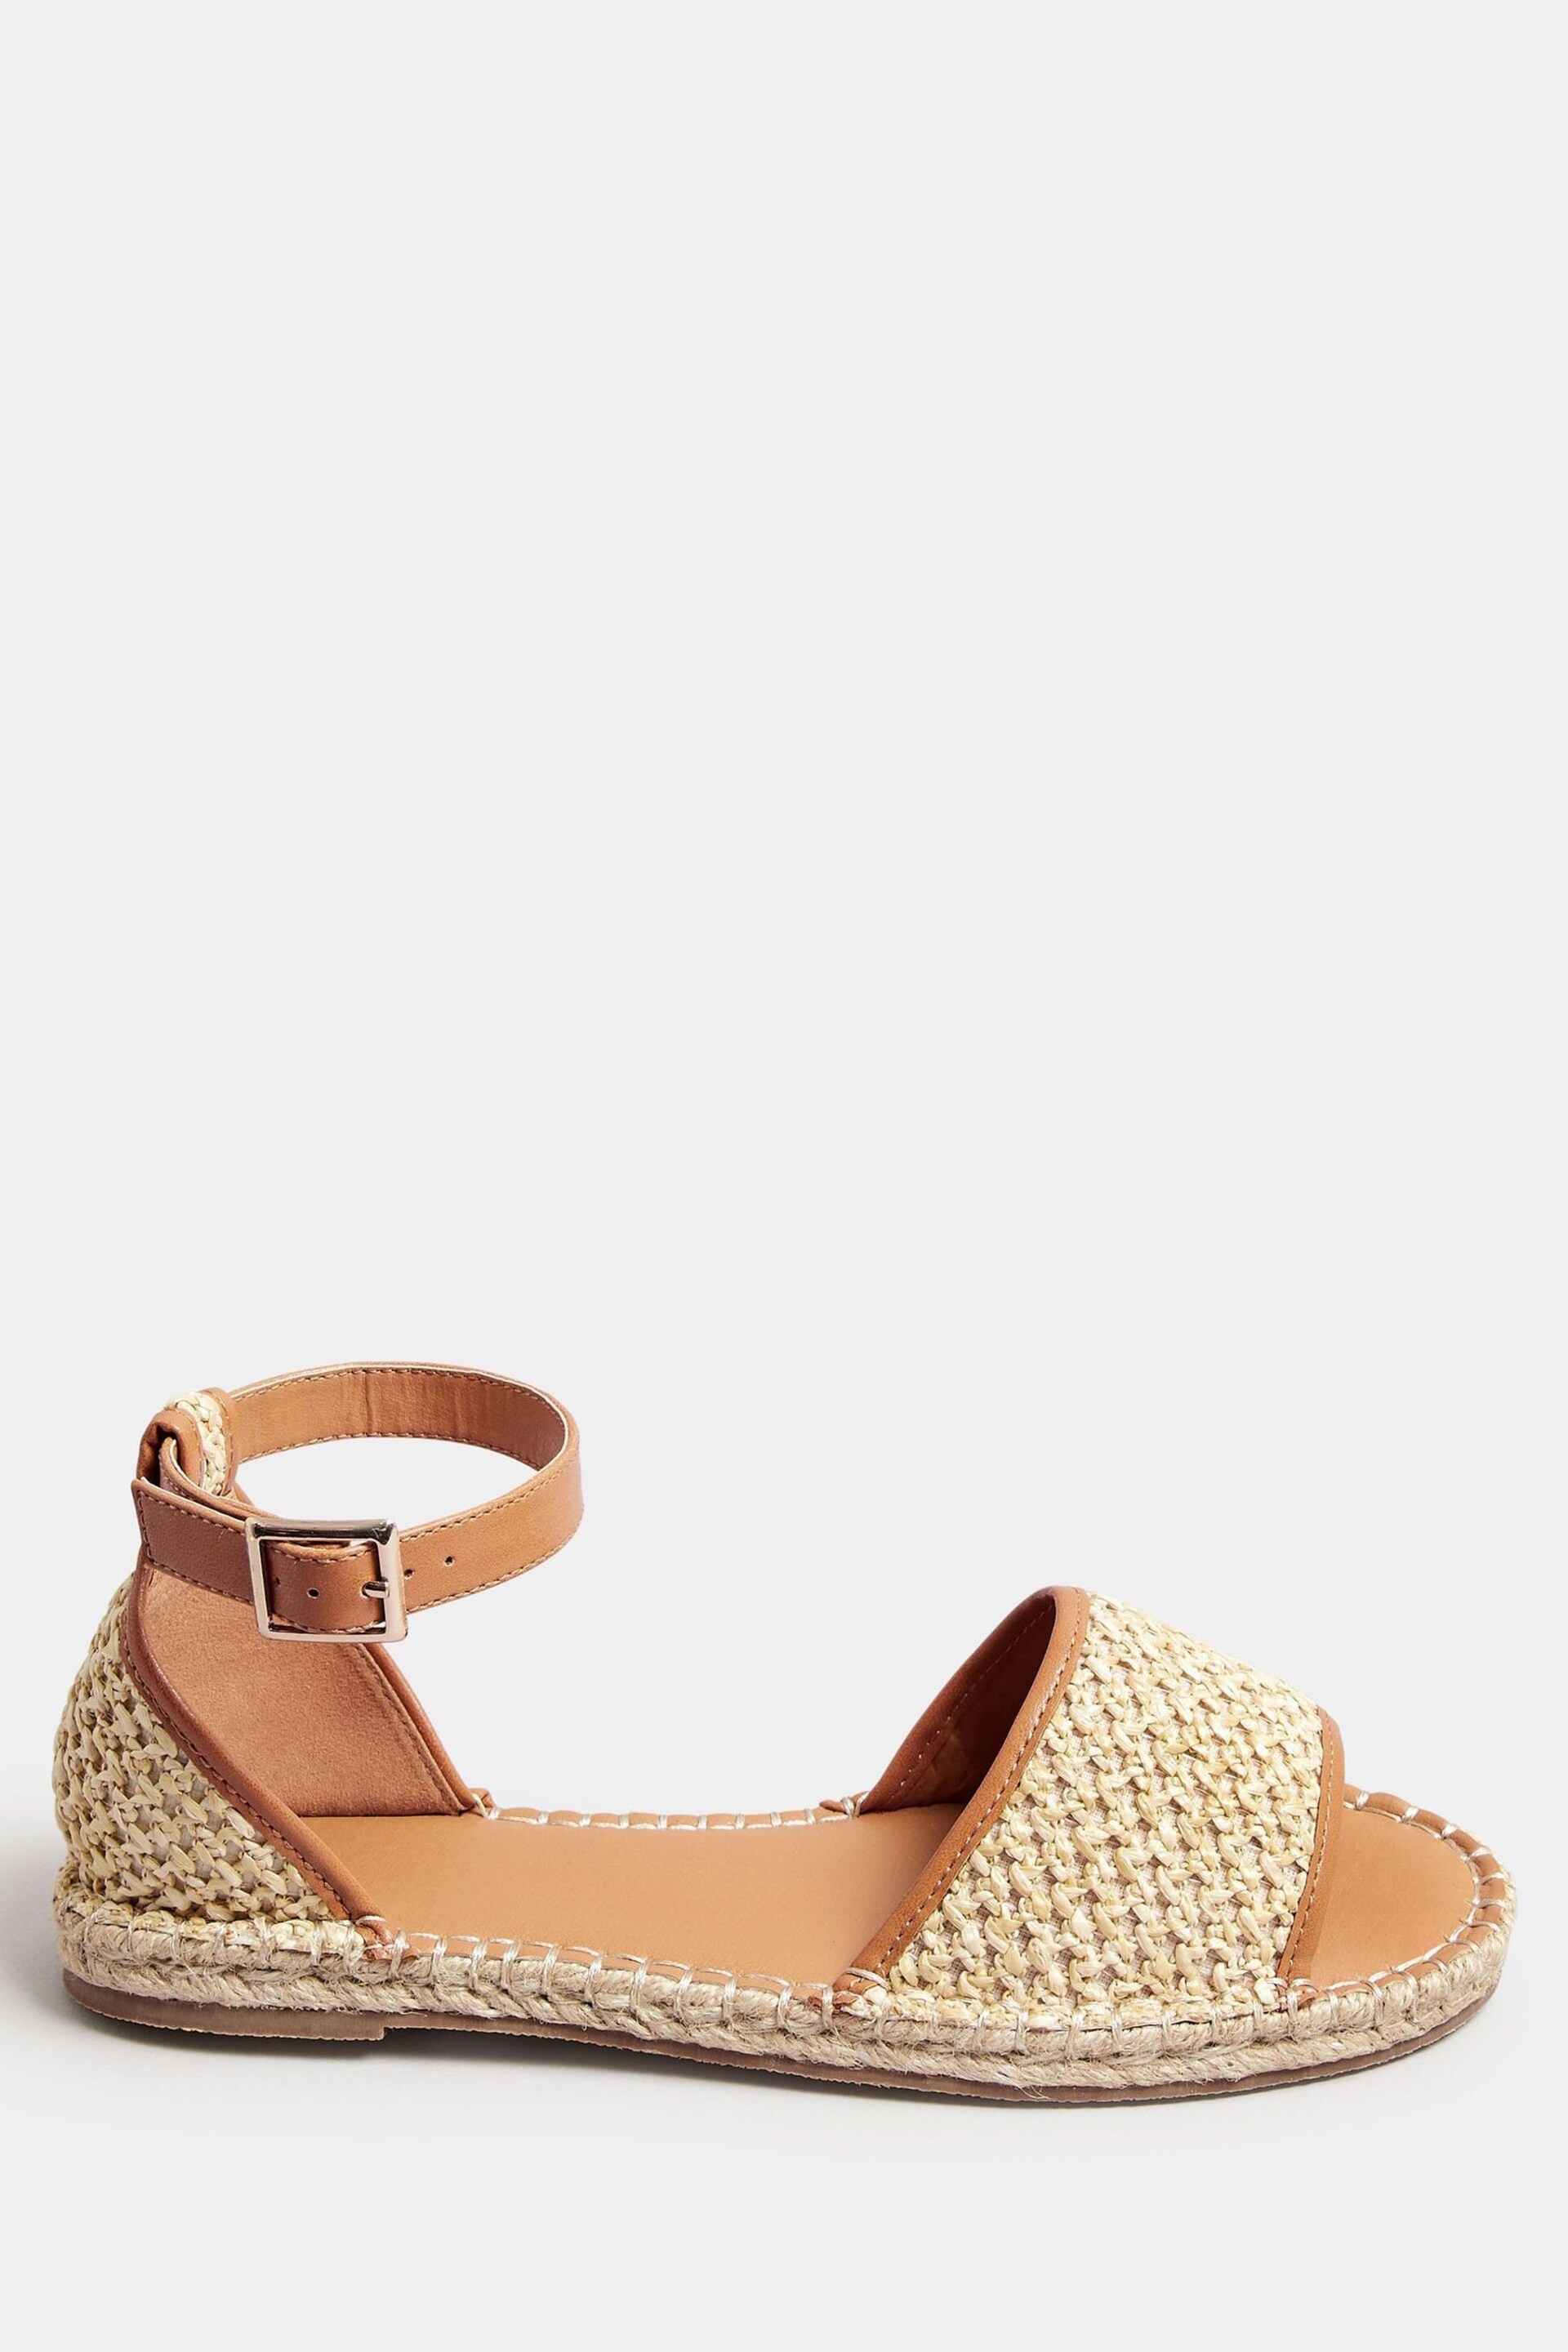 Long Tall Sally Natural Espadrille Open Toe Sandals In Standard Fit - Image 2 of 5